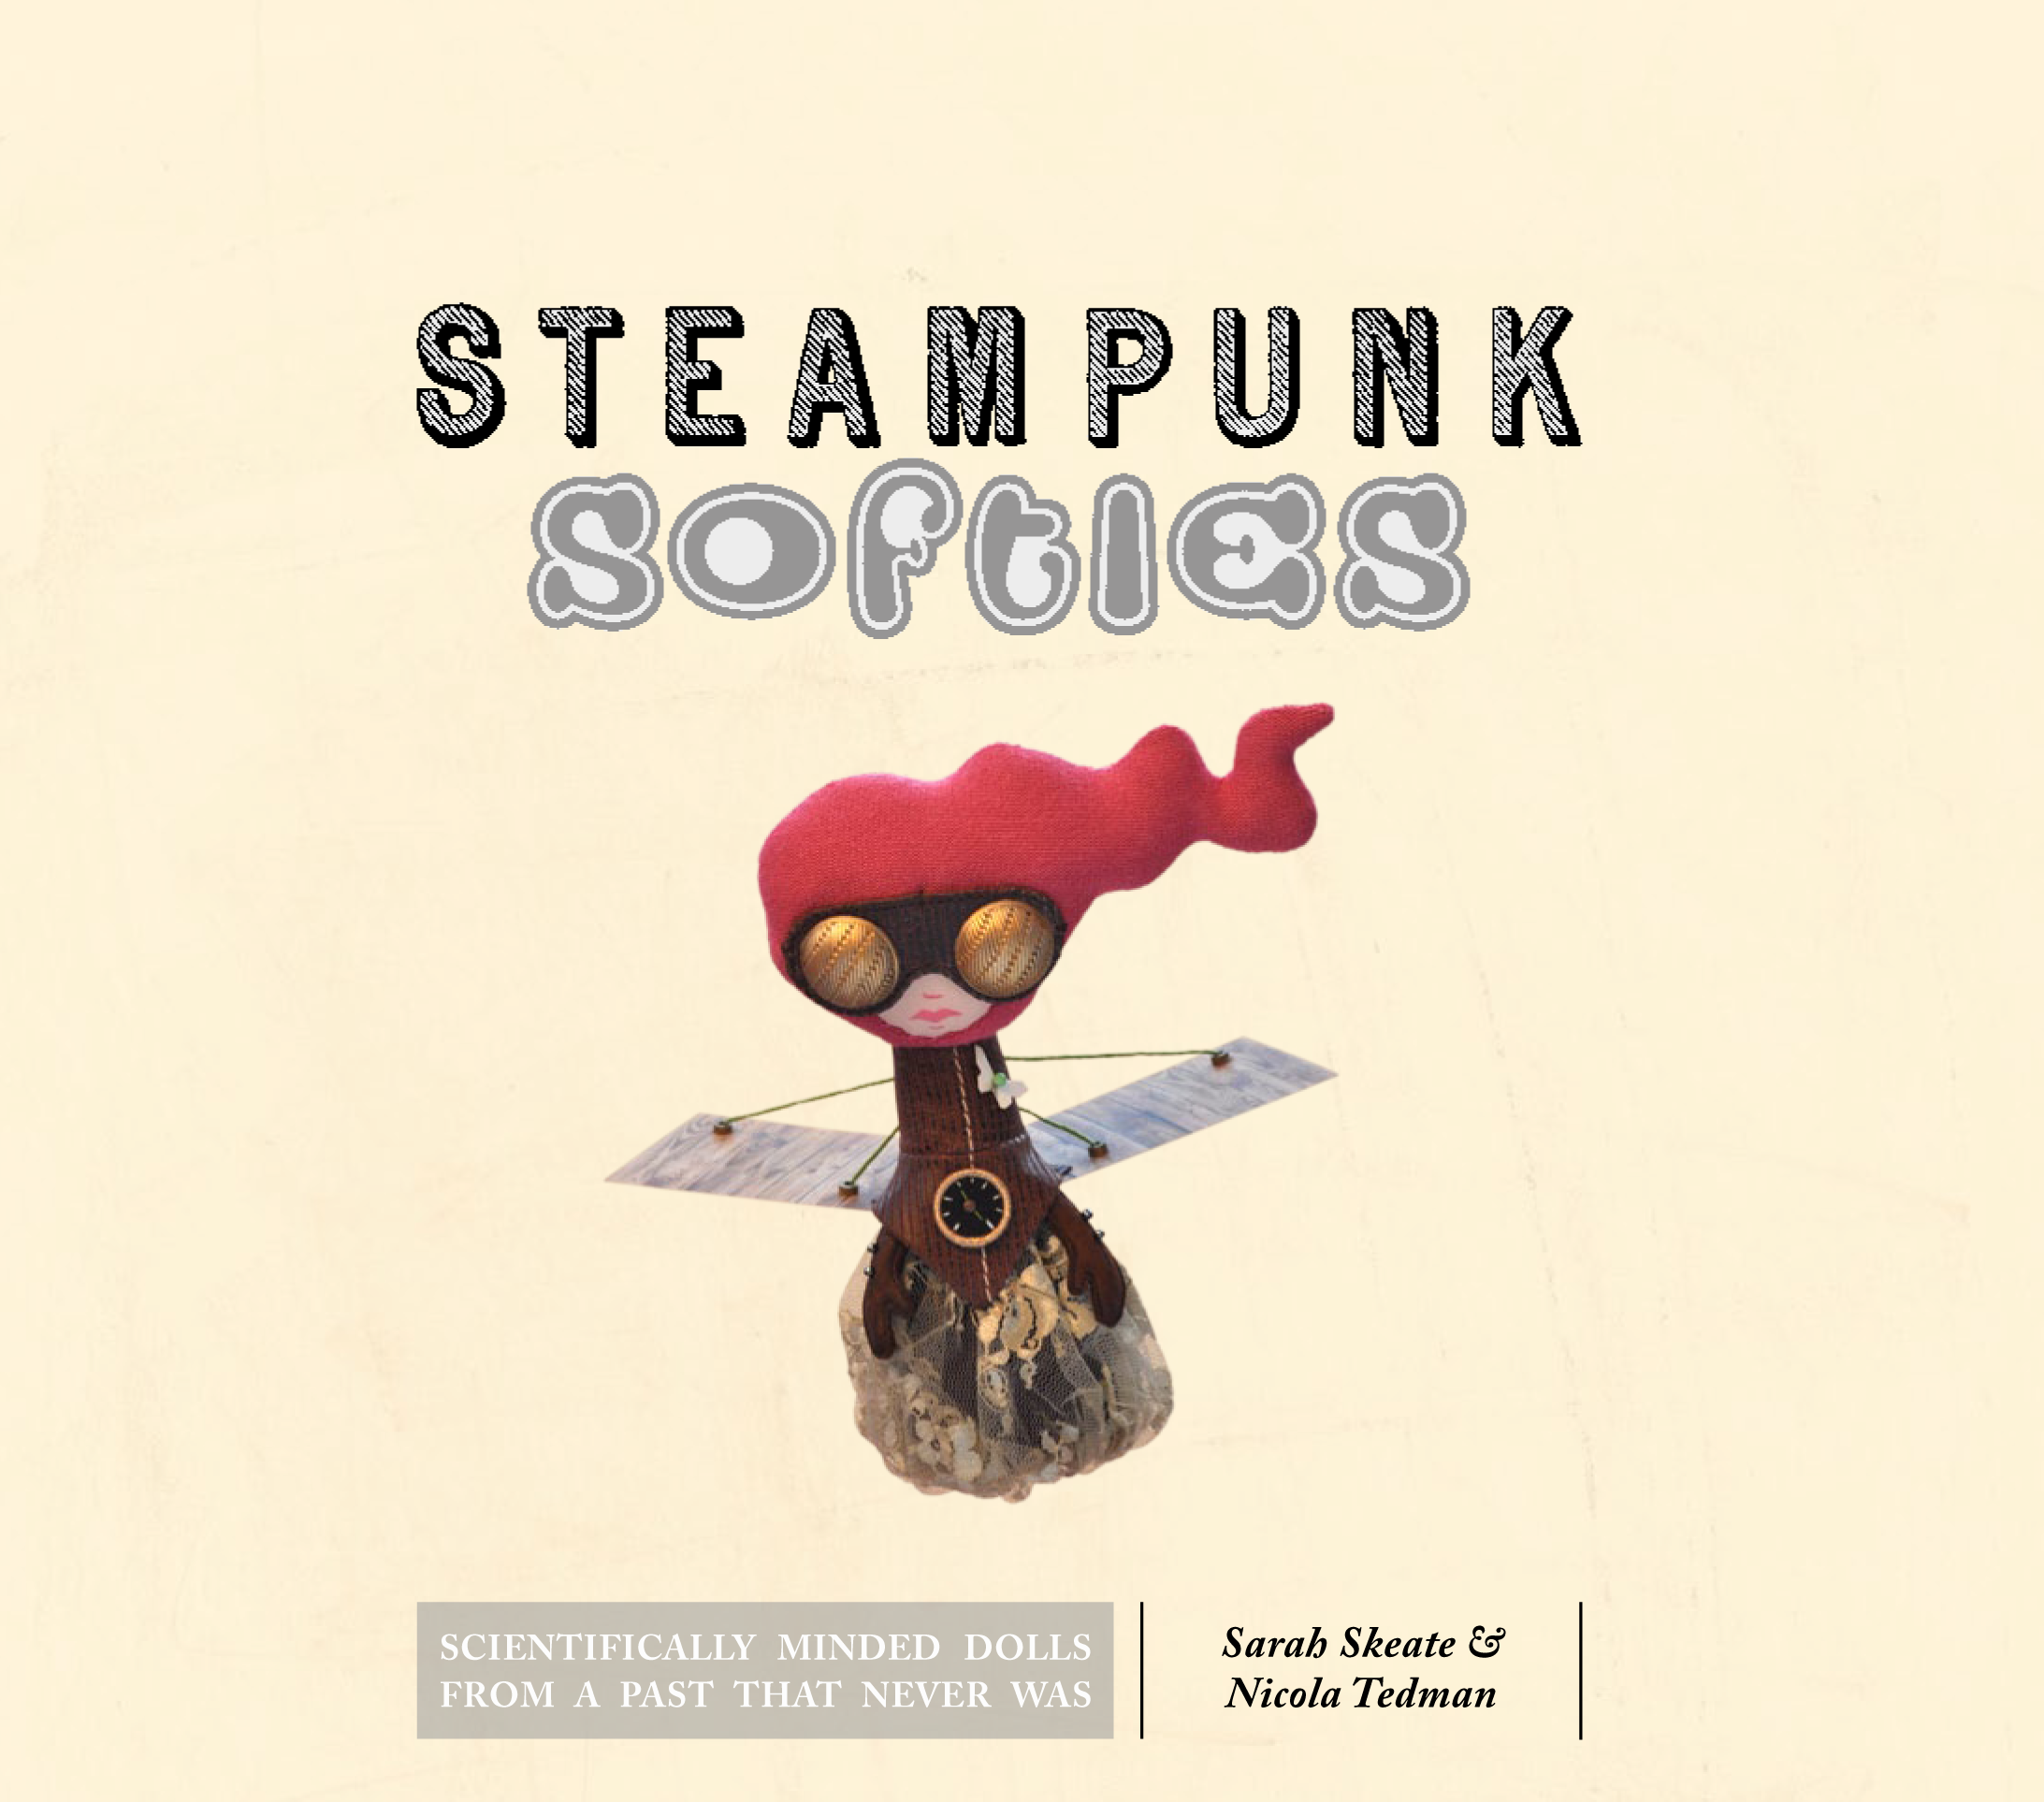 Steampunk Softies Copyright Ivy Press Limited 2011 All rights reserved No - photo 2